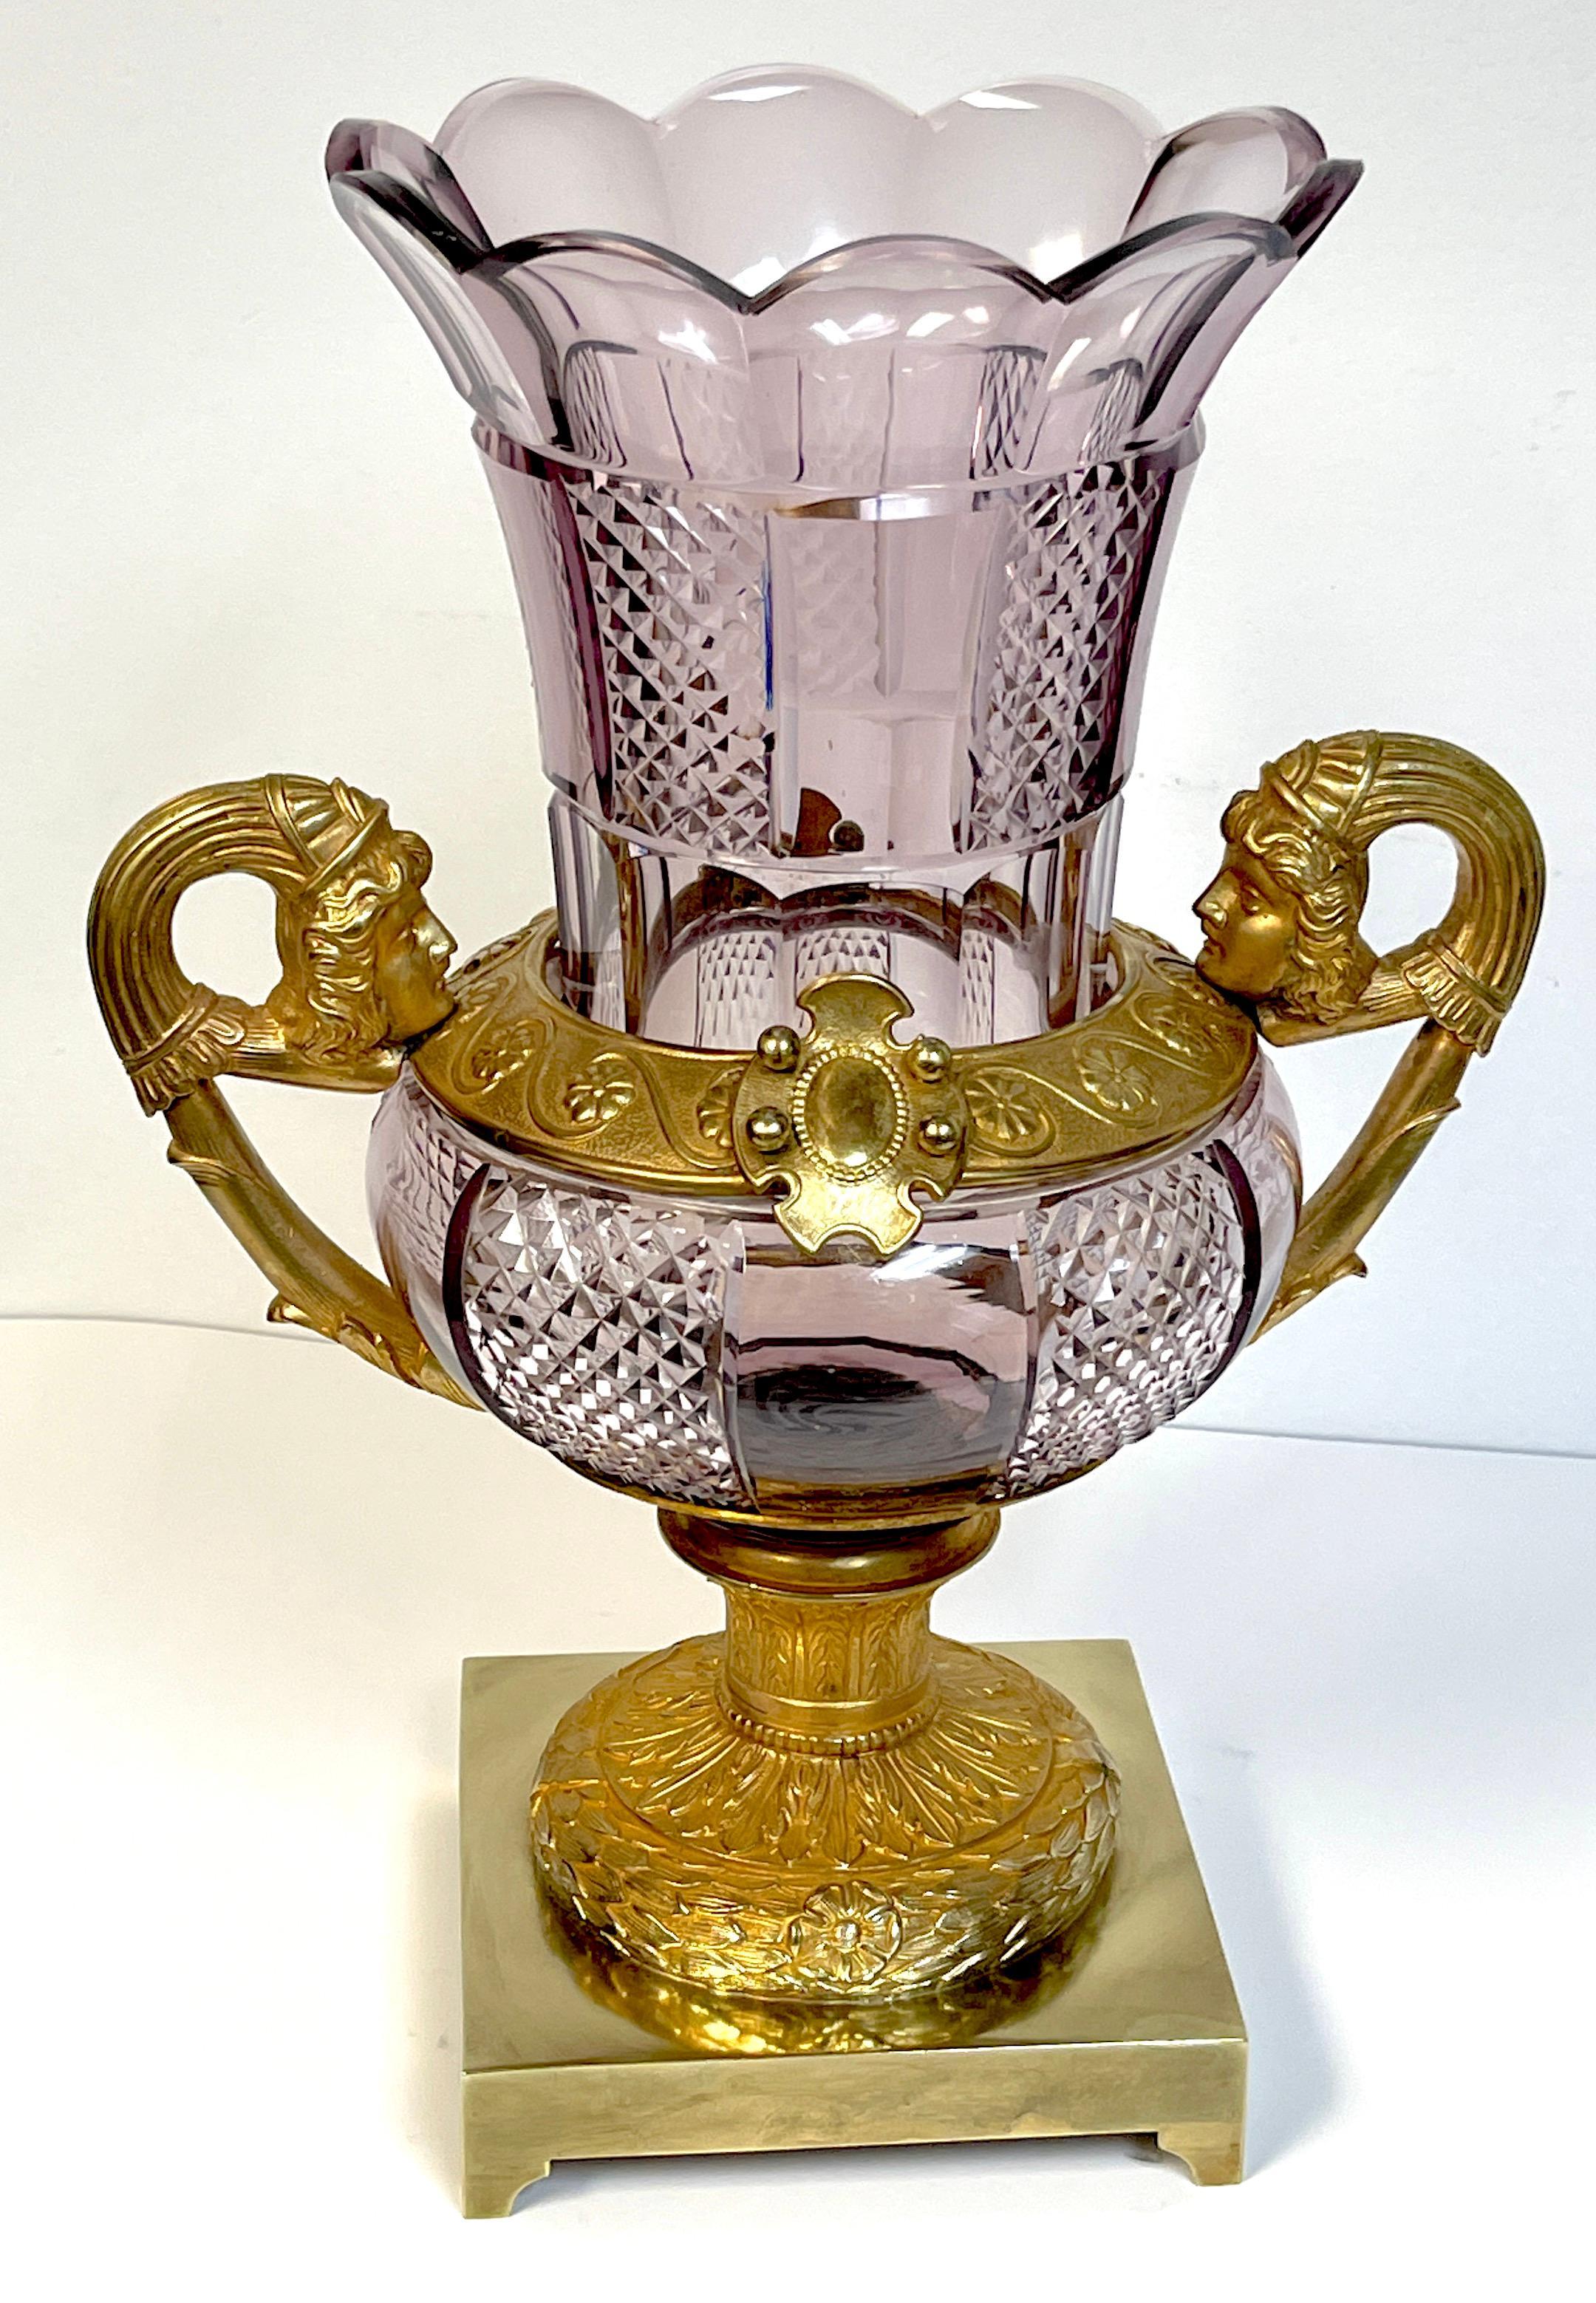 Large 19th Century Russian Neoclassical Ormolu and Amethyst Cut Glass Vase For Sale 4